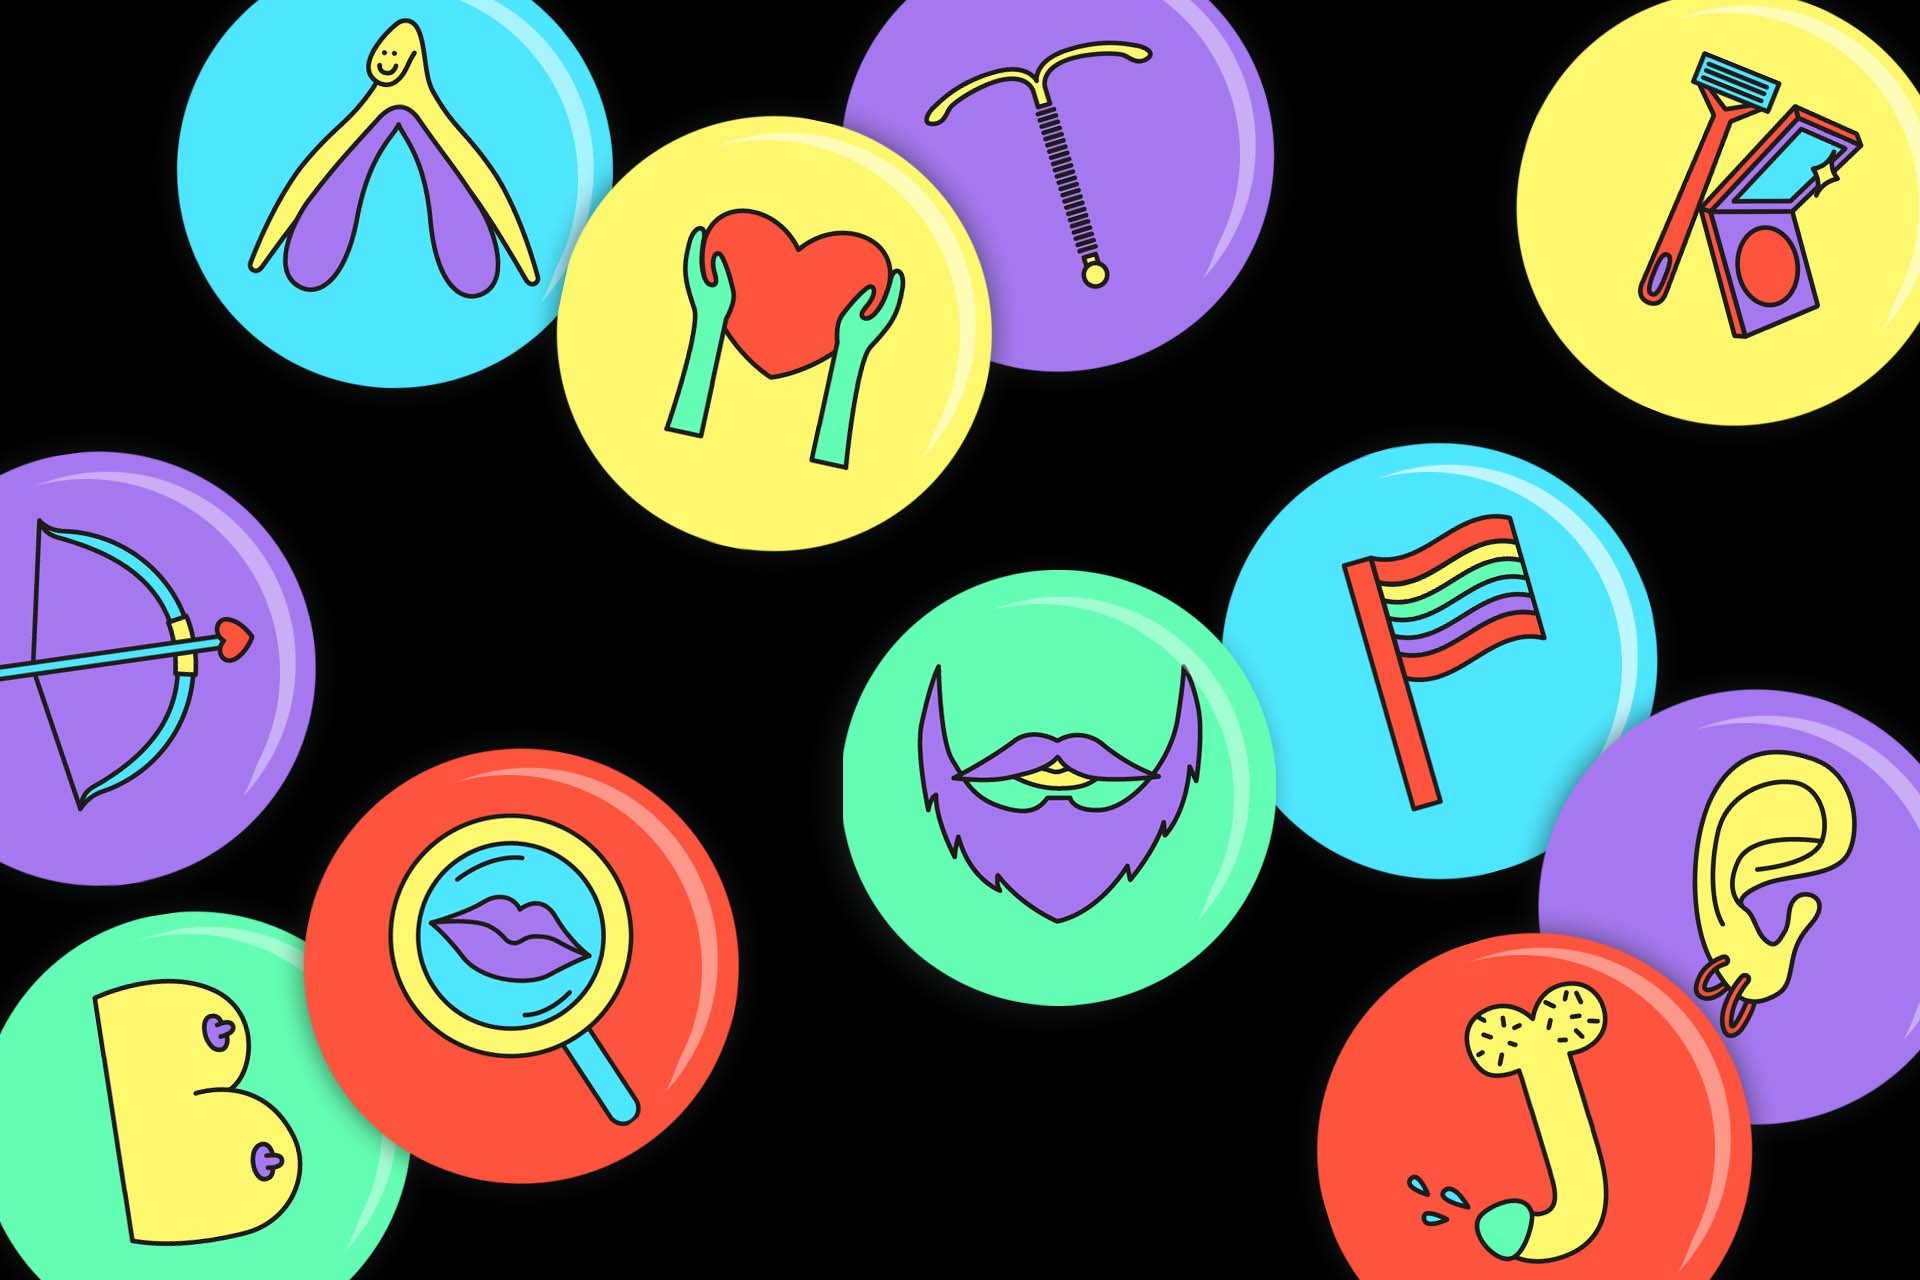 Colorful stickers with illustrated letters on the theme of sexuality and gender: rainbow flag, beard, make-up, breasts, clitoris, etc.